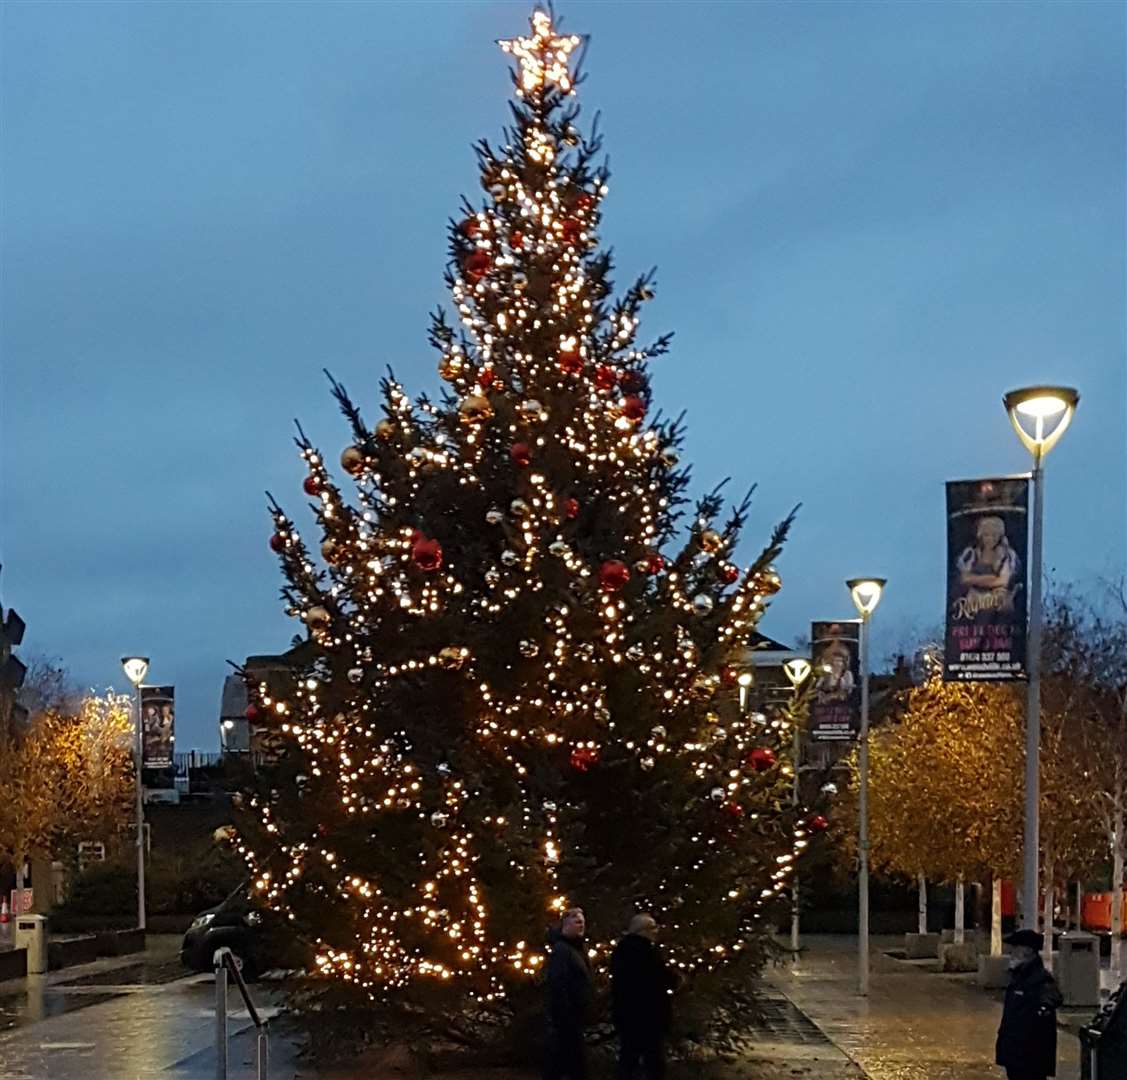 The Christmas tree in Community Square, Gravesend. Picture: Jason Arthur